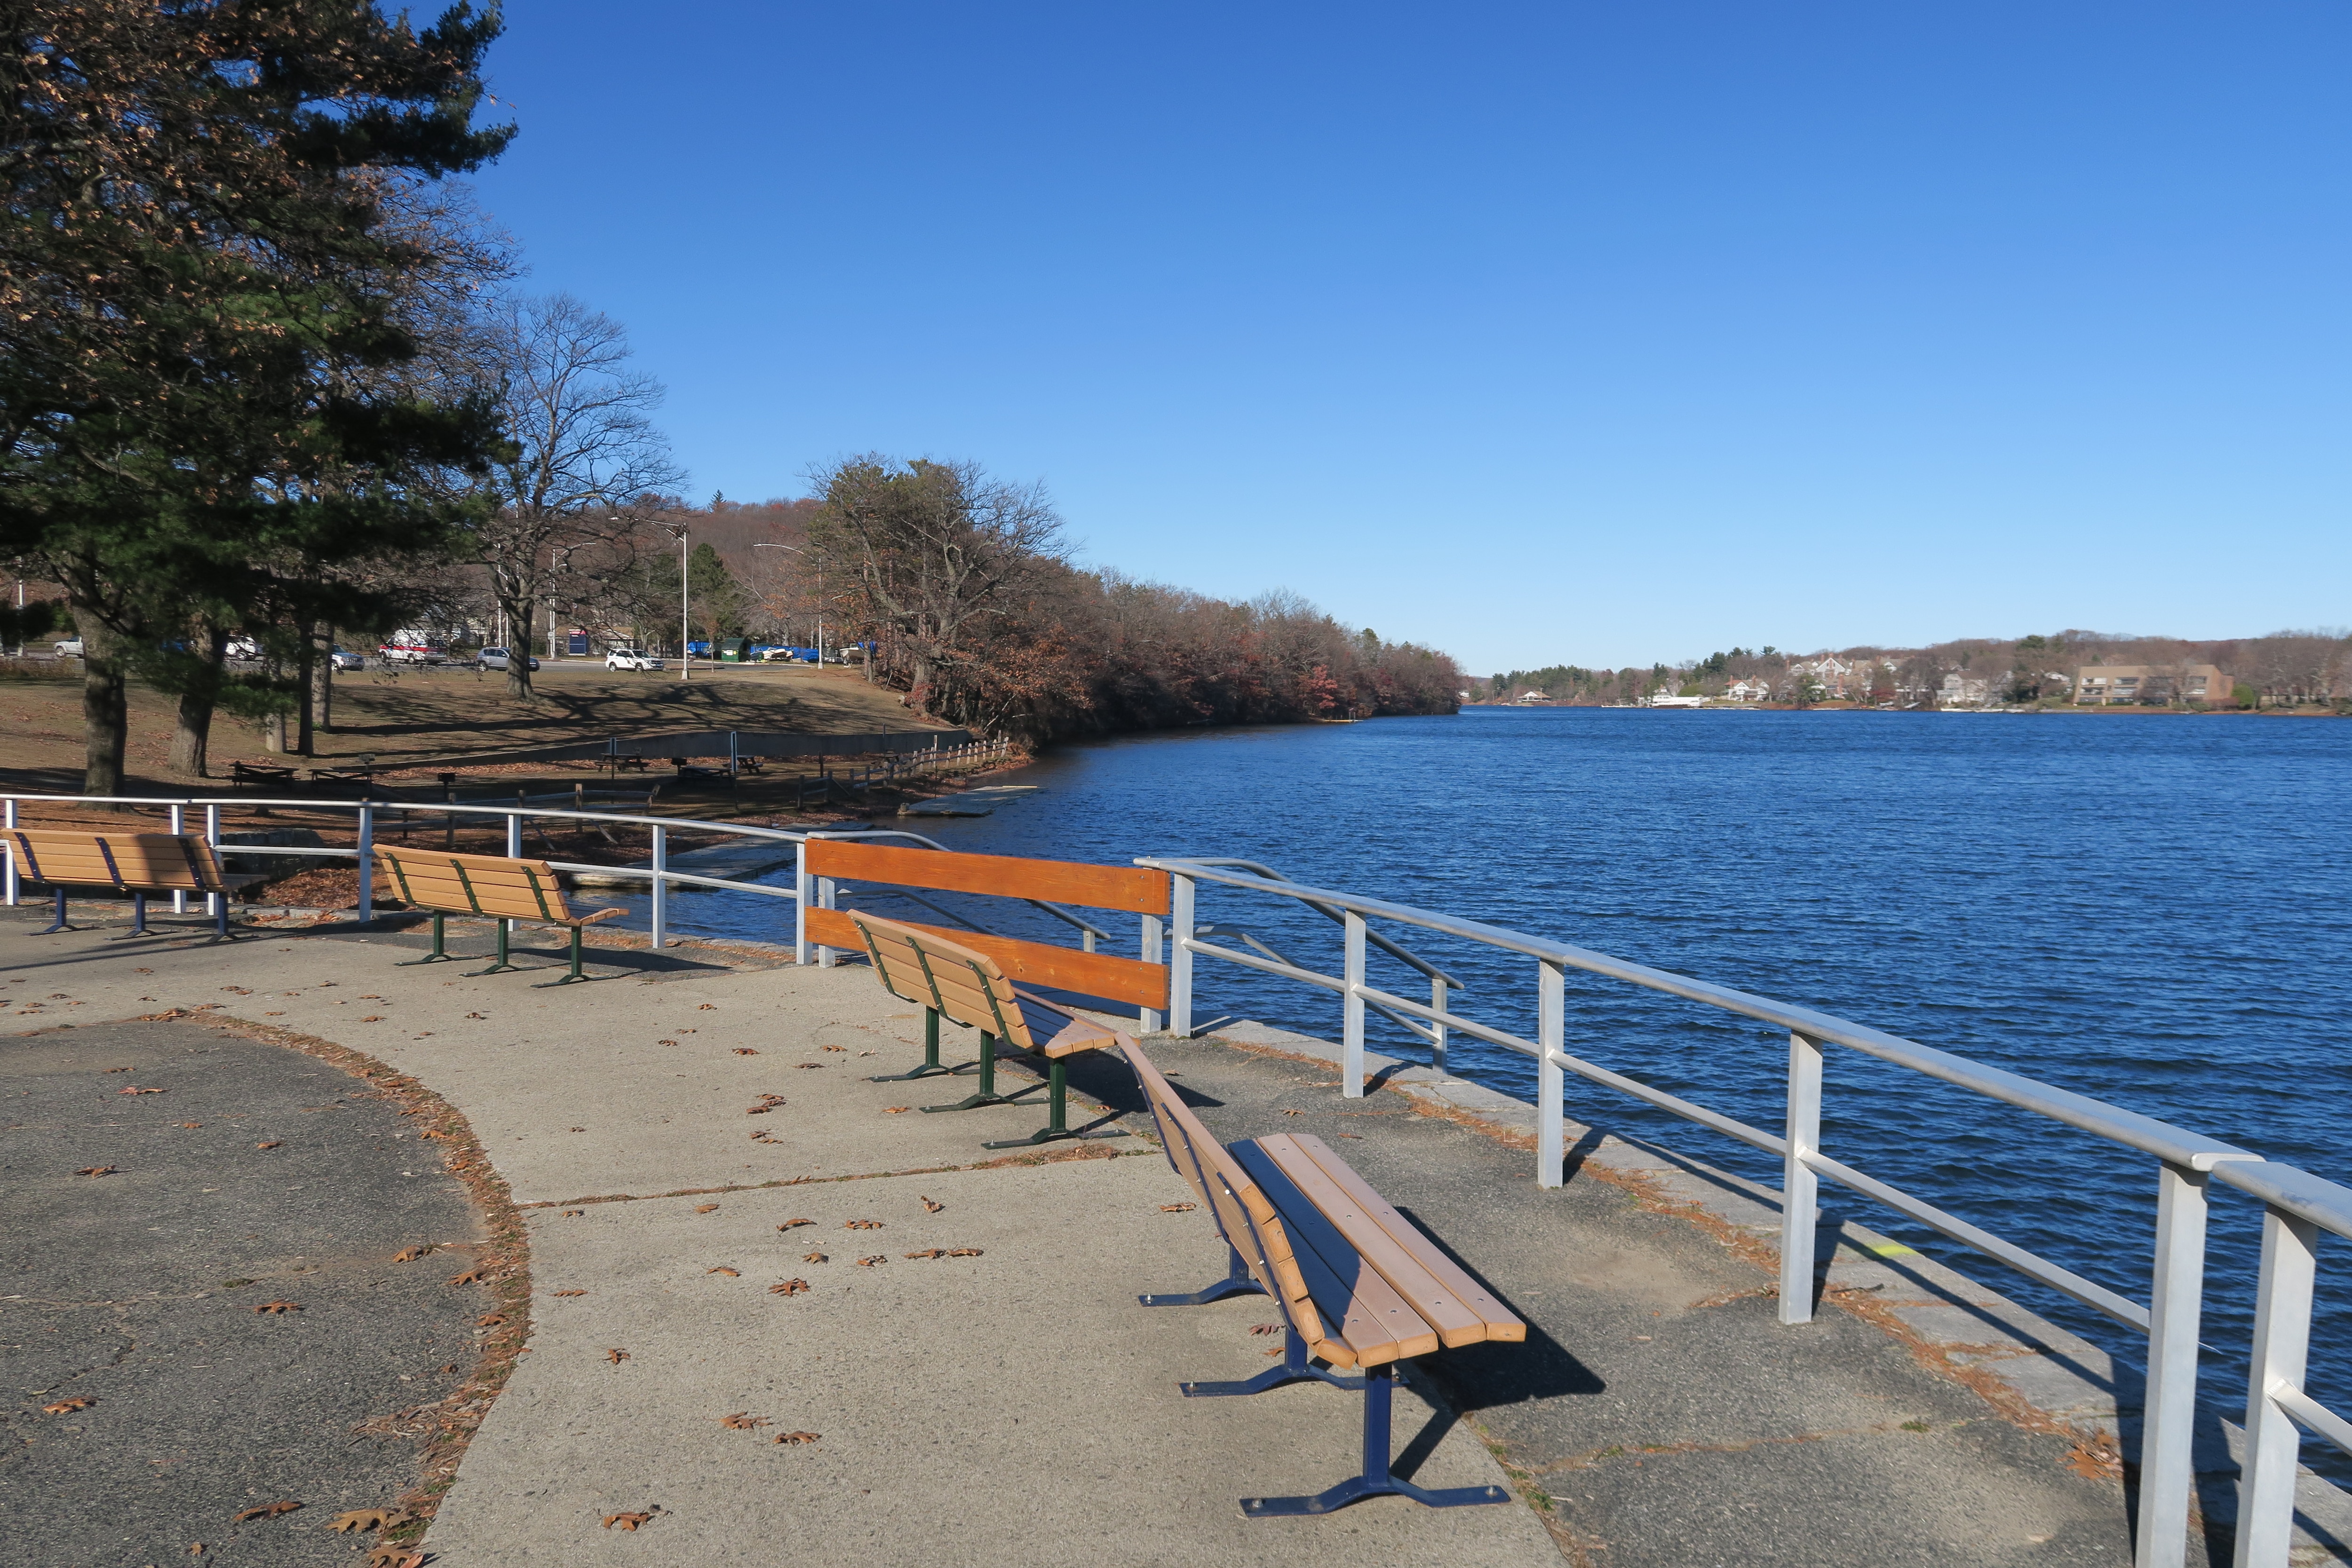 A curved promenade with benches and a railing overlooks the water.